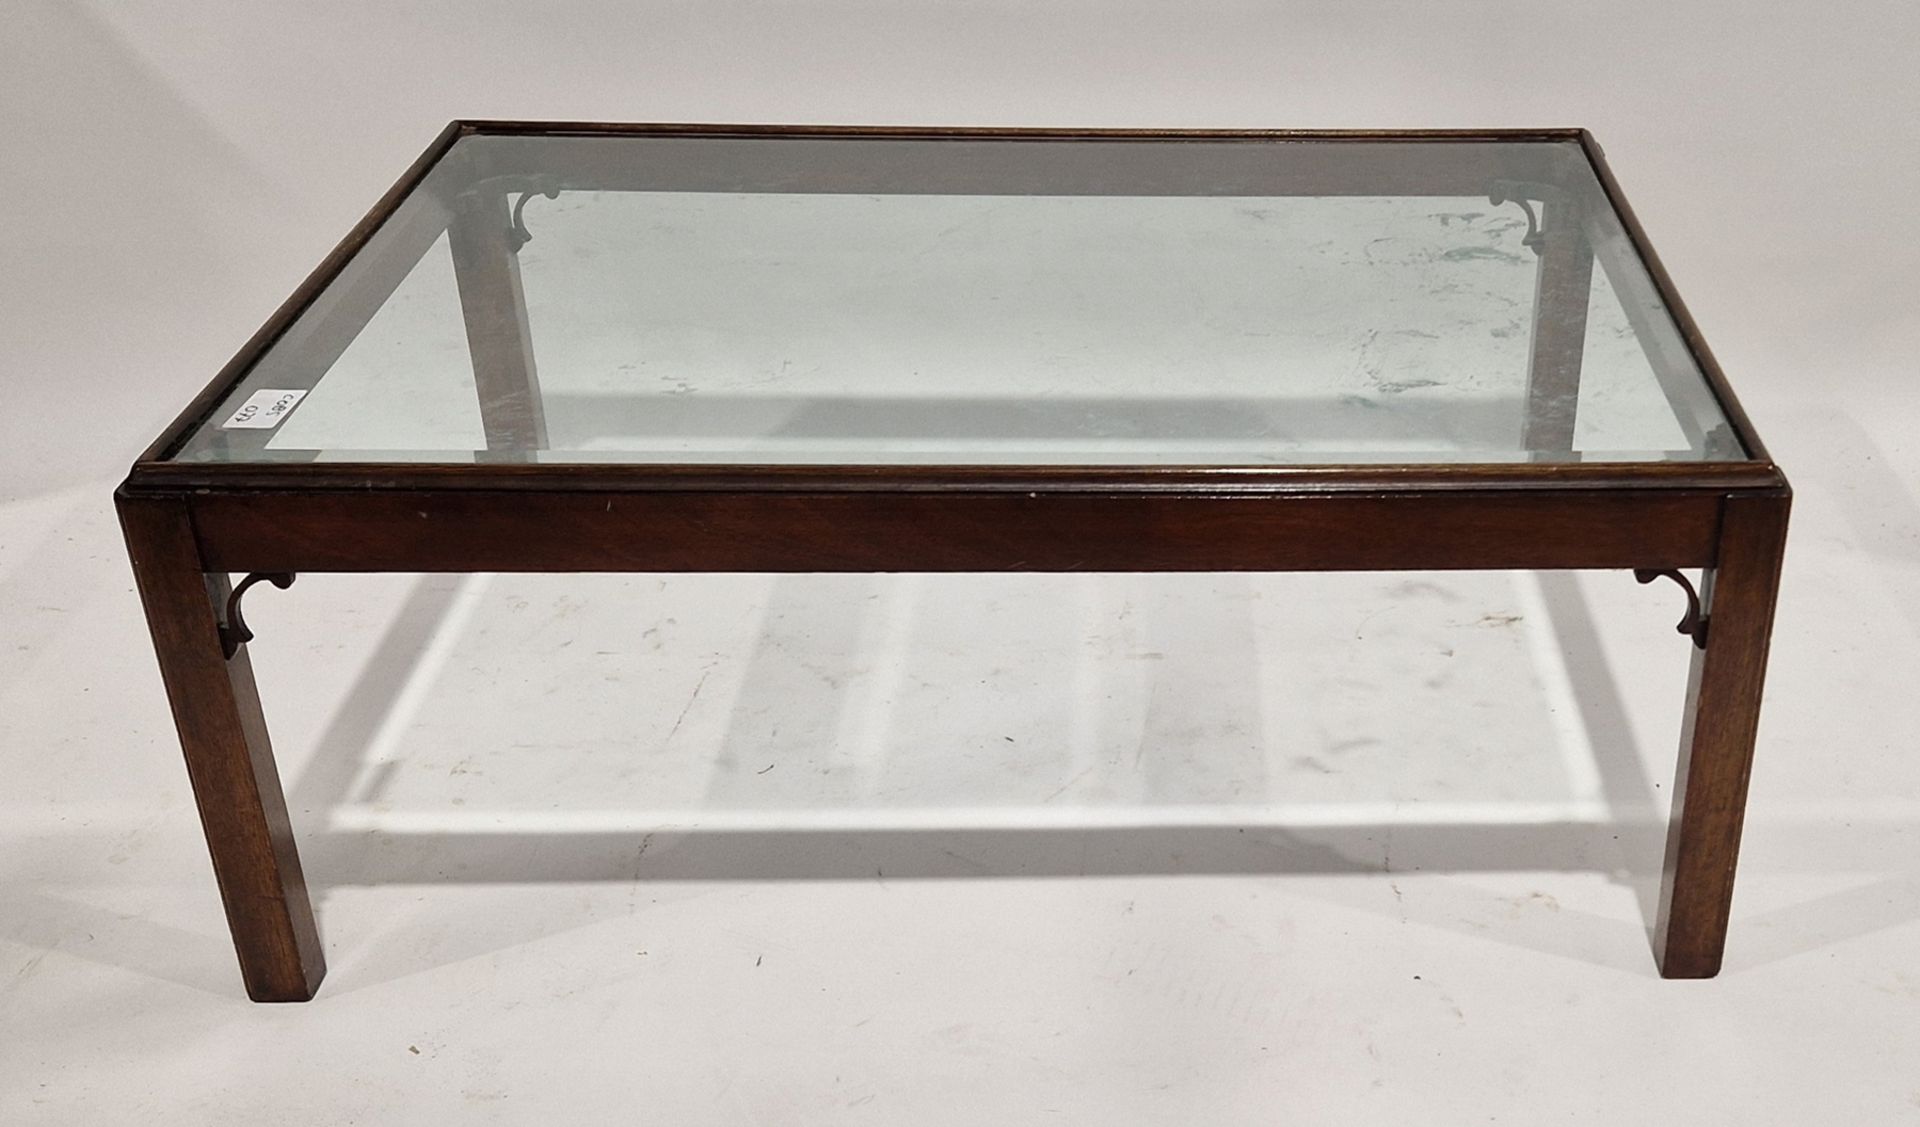 20th century mahogany coffee table with bevel edged glass top, 43cm high x 110cm wide x 80cm deep - Image 2 of 2